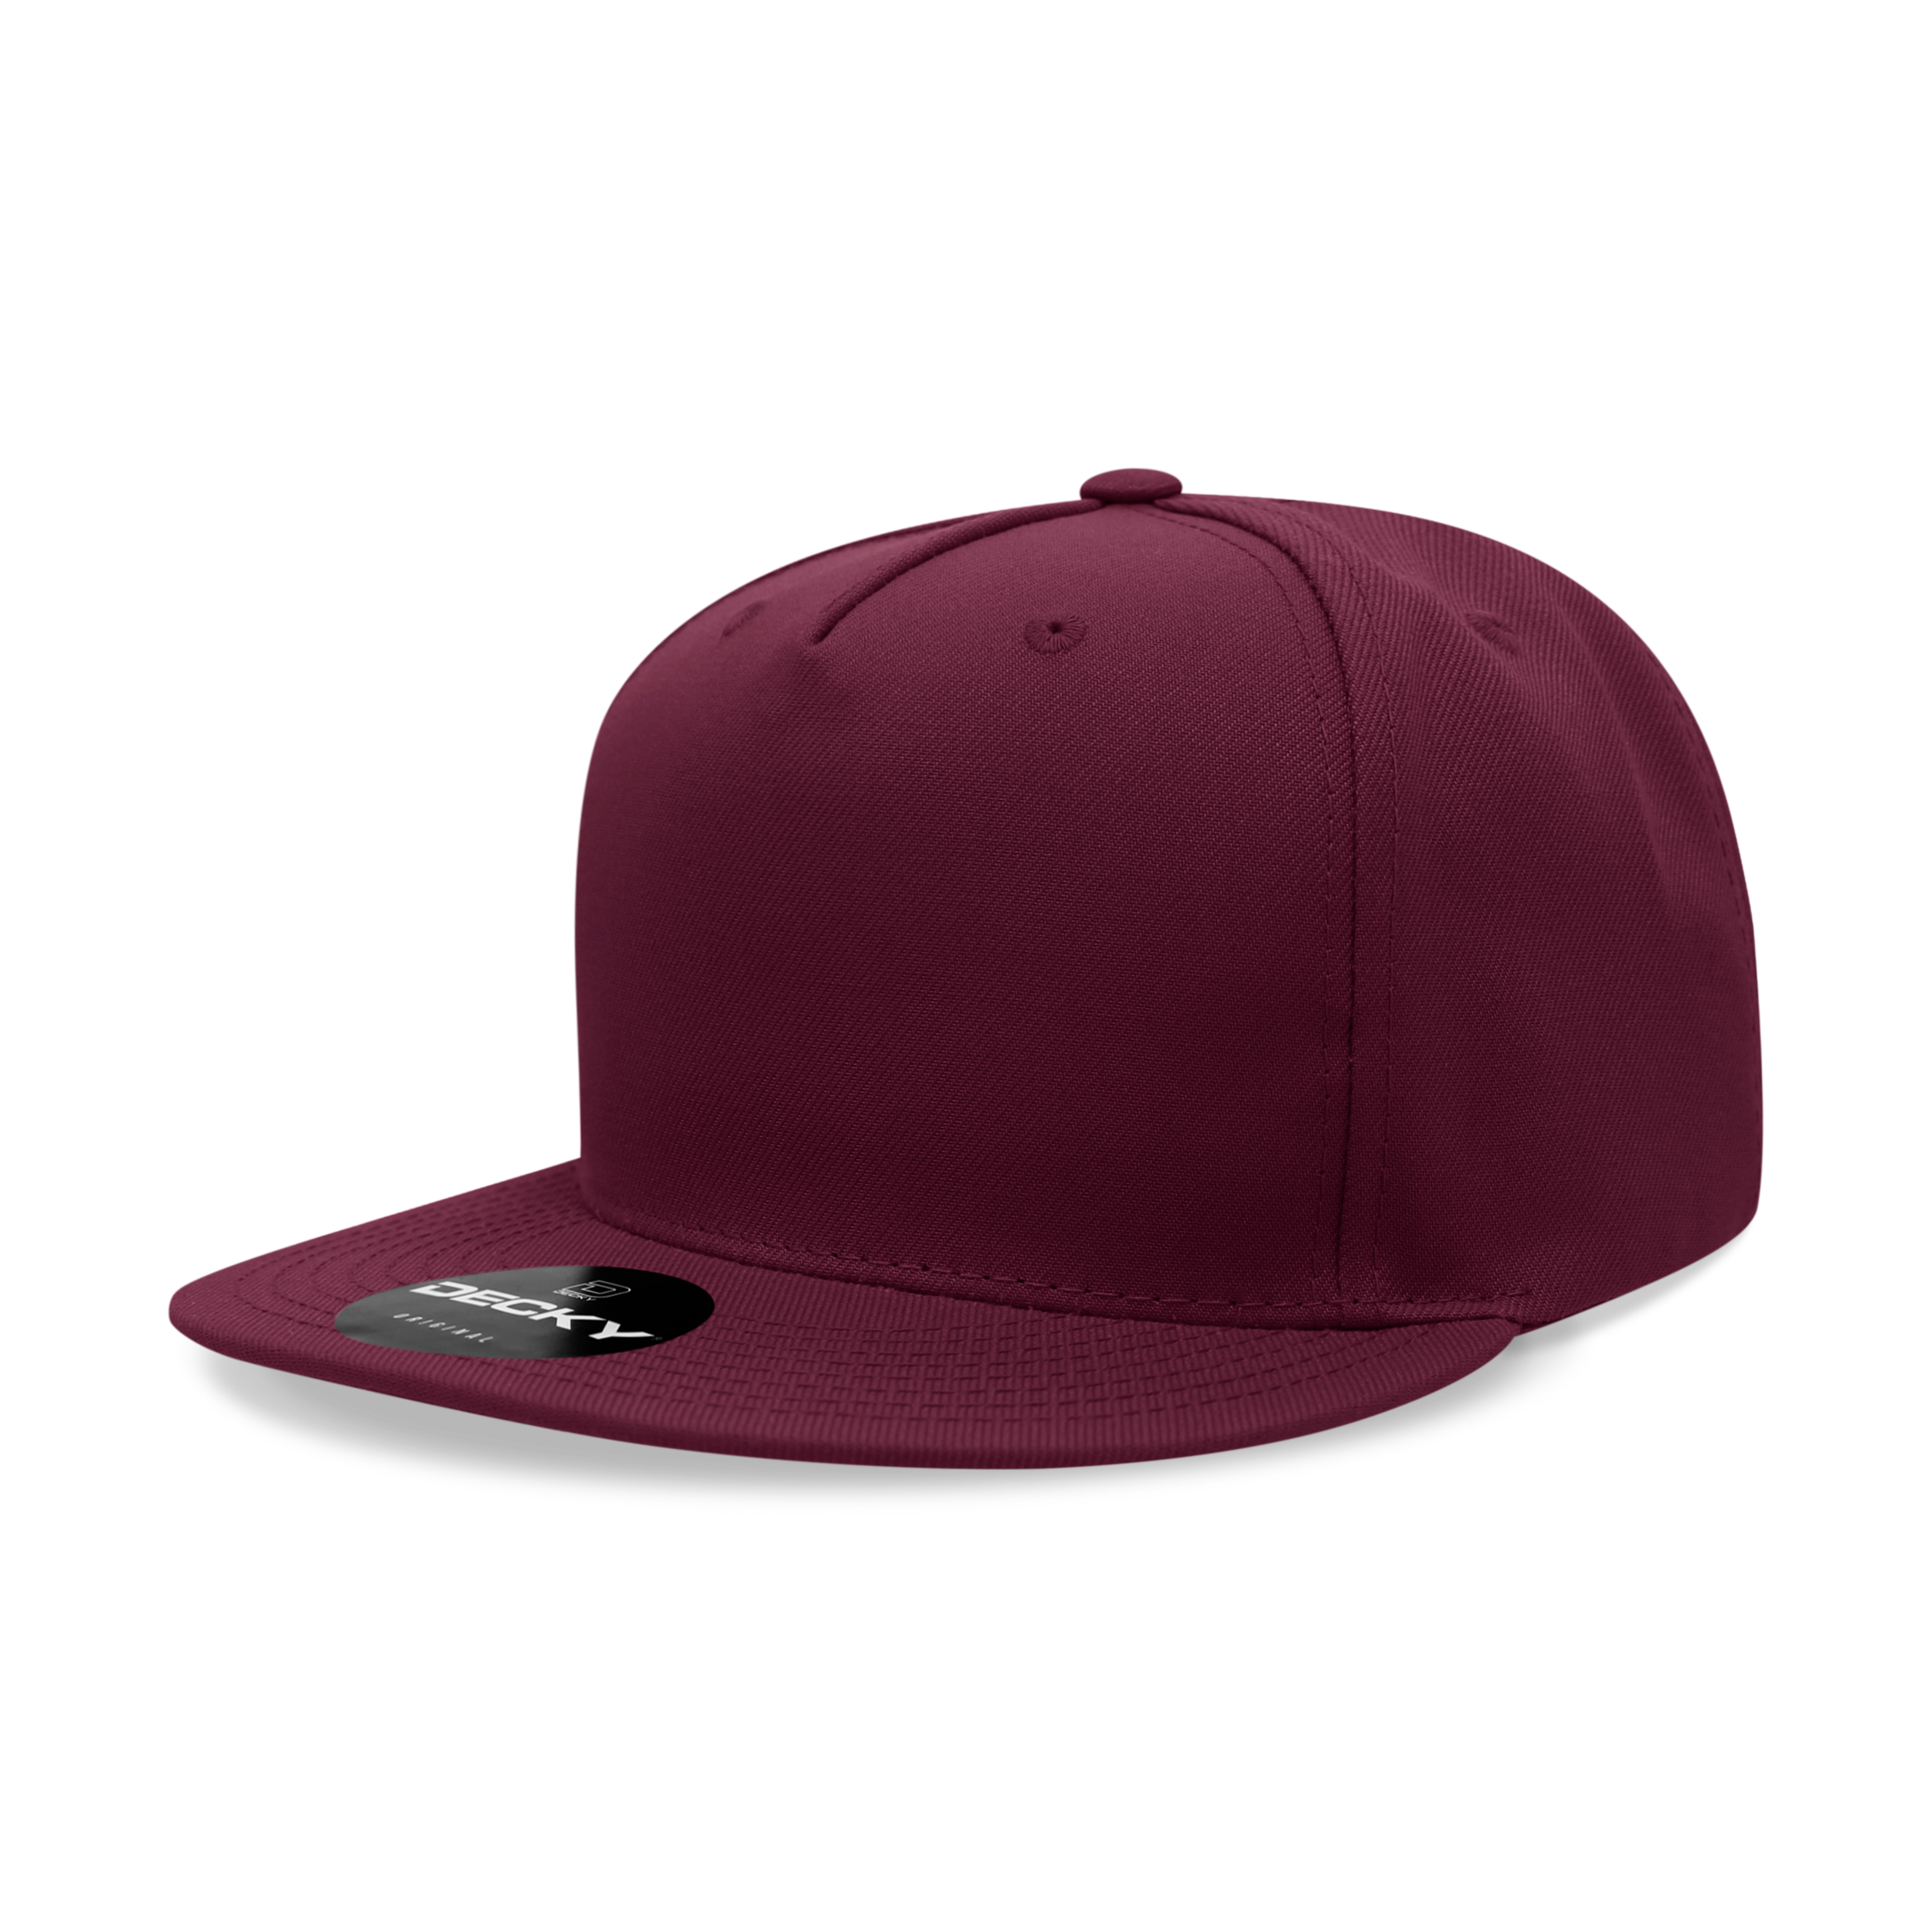 Maroon color variant